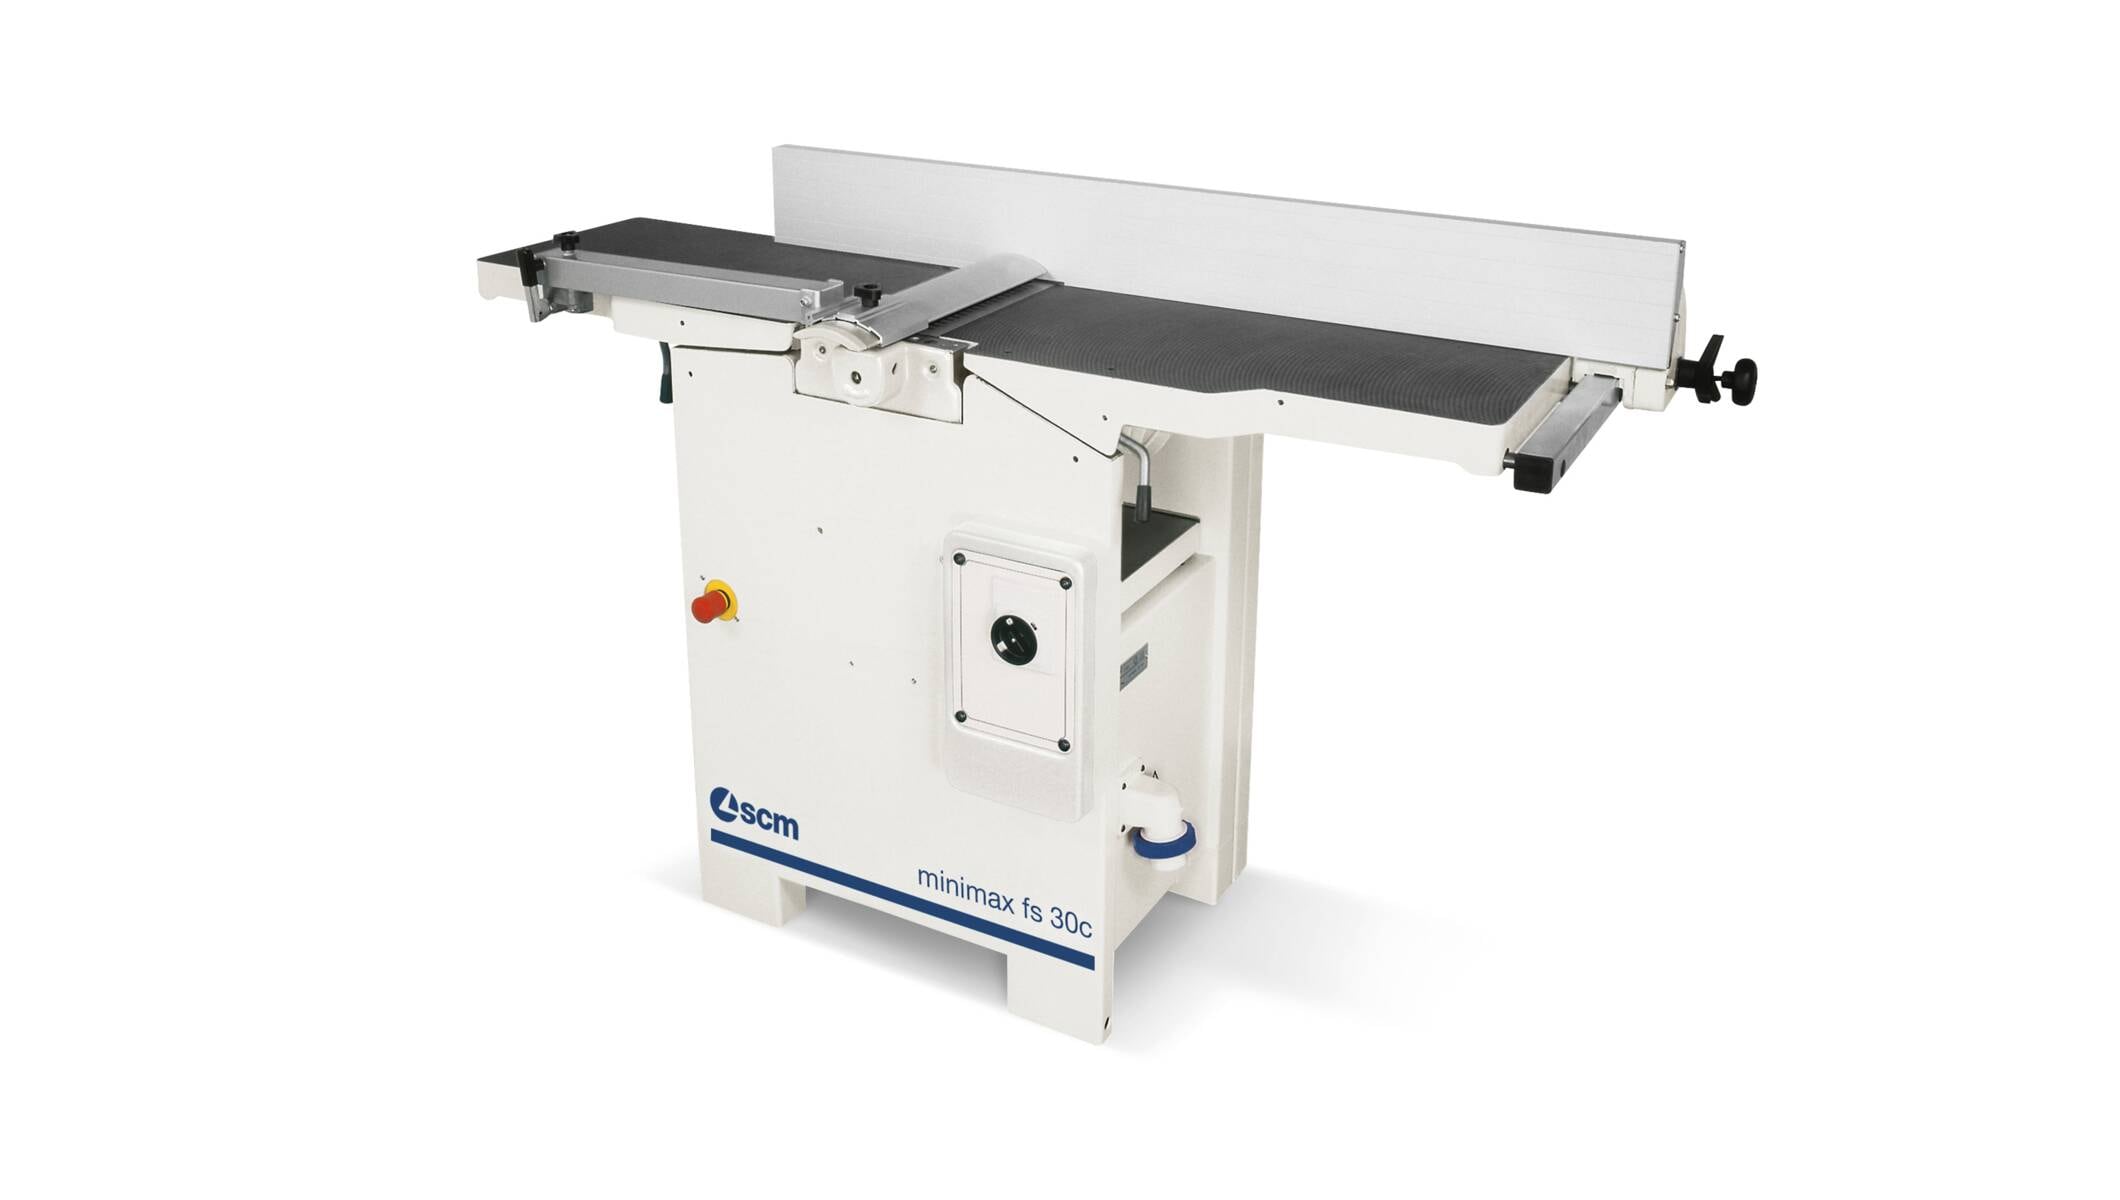 Joinery machines - Jointer/Planer Combination - minimax fs 30c